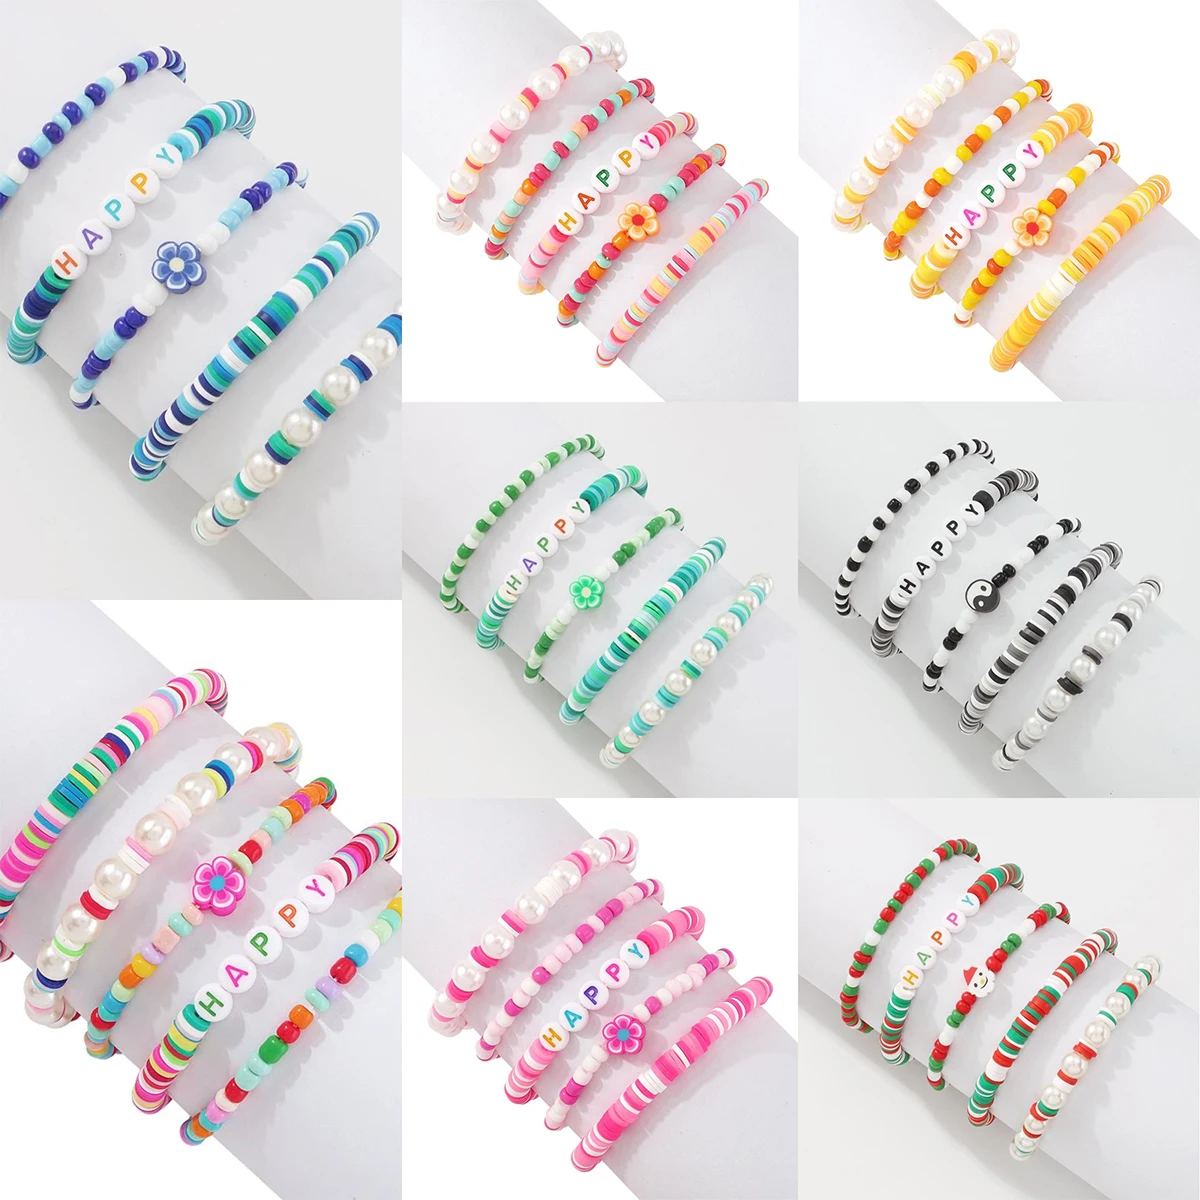 

Bohemian Multilayer Polymer Clay Bracelets Set for Women Flower Beads Happy Letter Bracelet Beach Party Jewelry Set Accessories